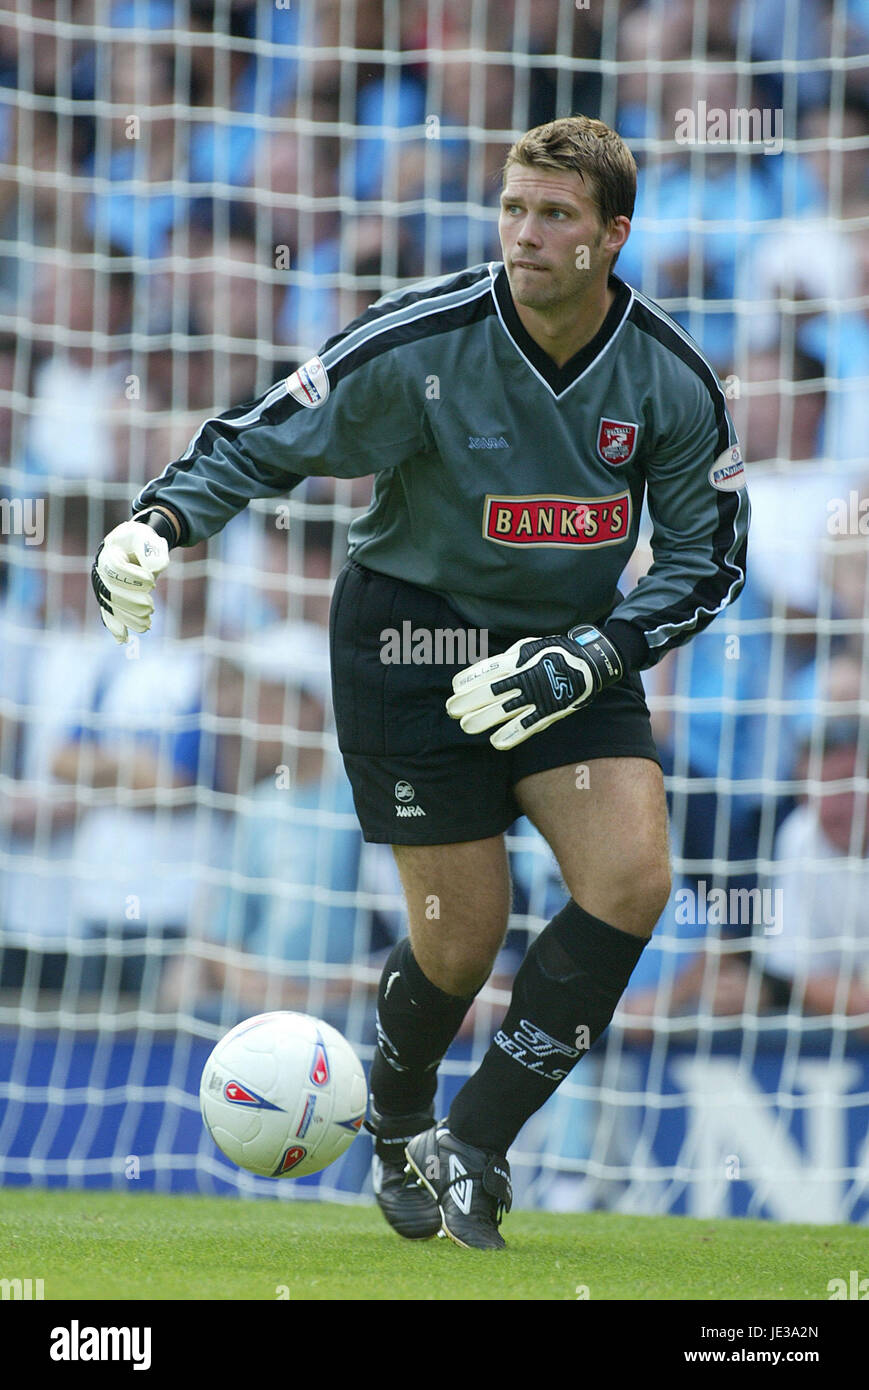 JAMES WALKER WALSALL FC HIGHFIELD ROAD COVENTRY 16. August 2003 Stockfoto